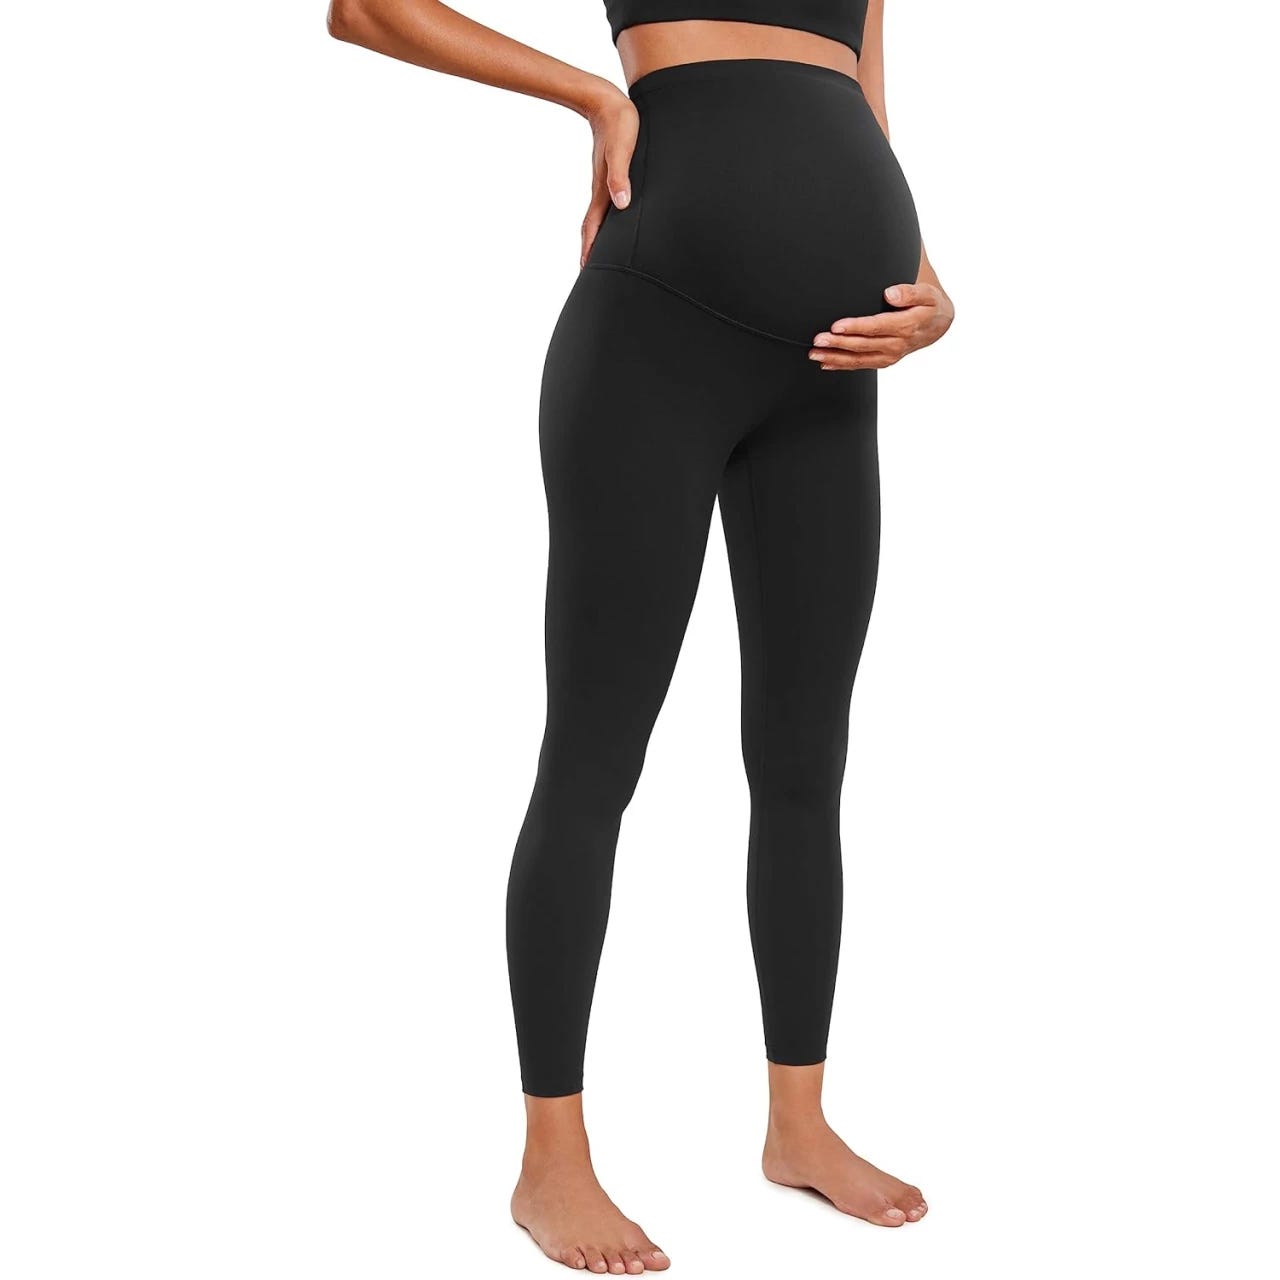 JOYSPELS Maternity Leggings Over The Belly with Pockets Non-See-Through  Workout.